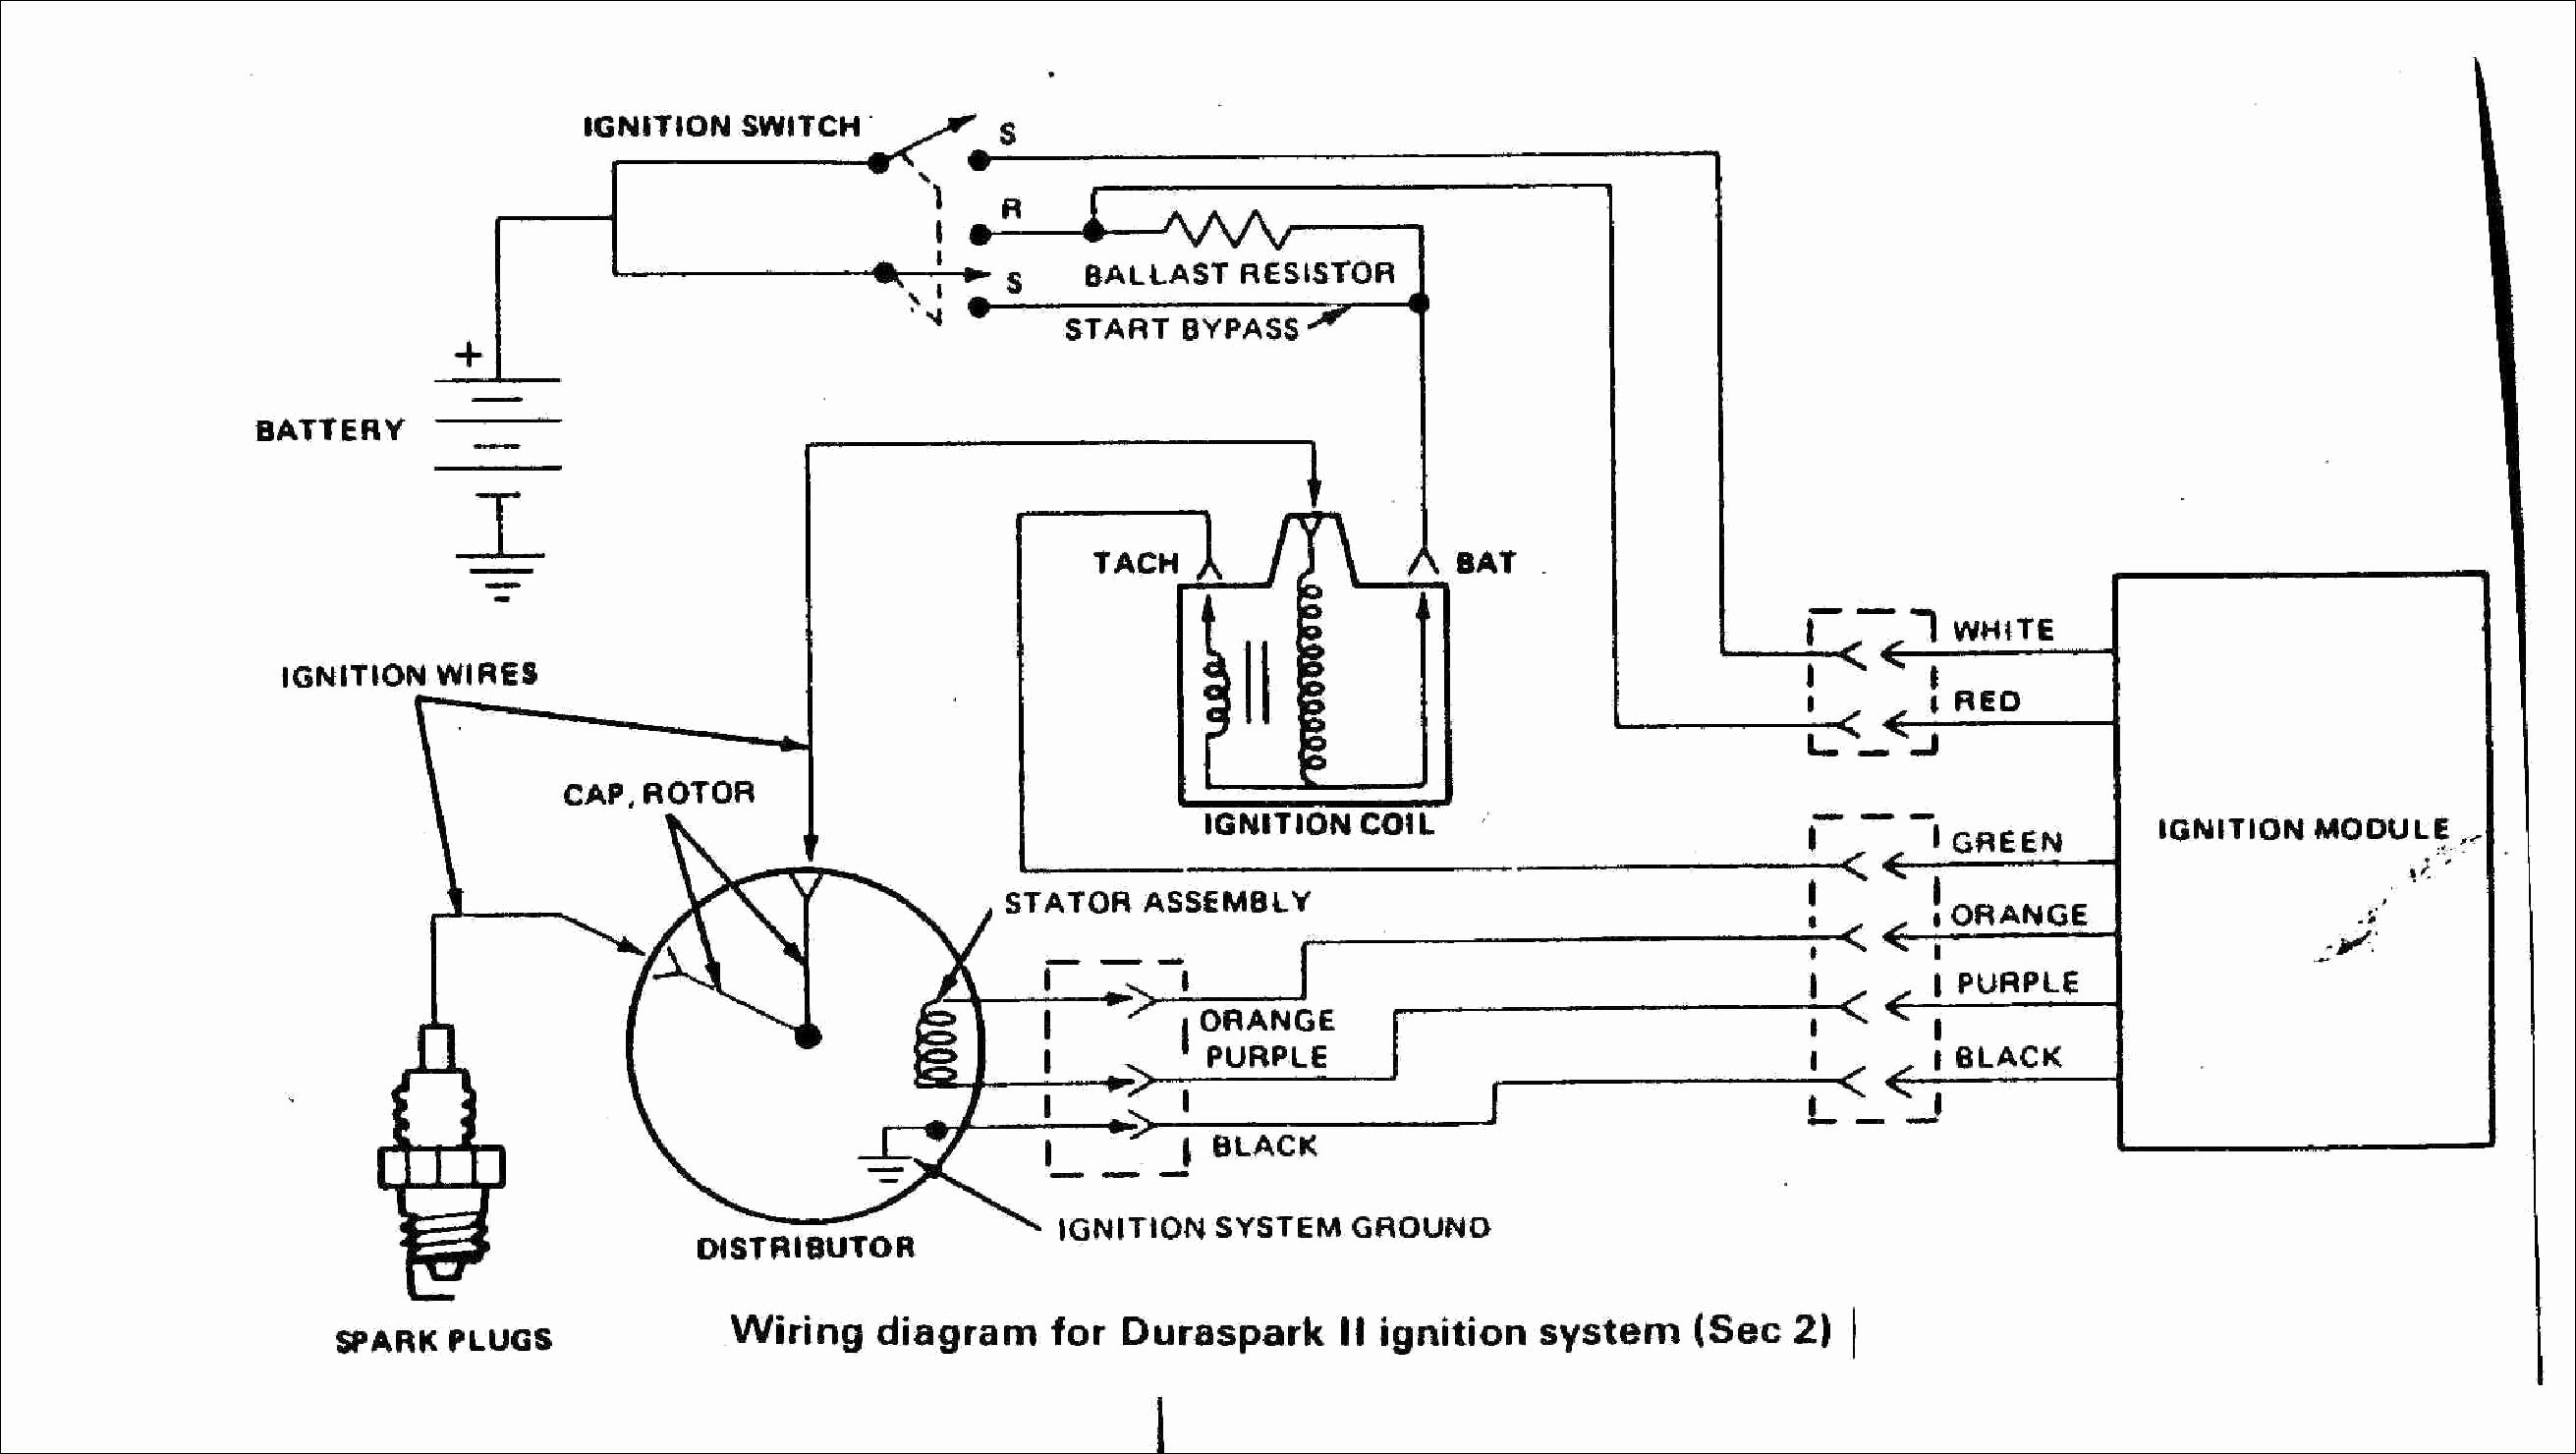 Obd1 Engine Harness Diagram Jza80 Wiring Diagram New 3 Position Ignition Switch Wiring Diagram Of Obd1 Engine Harness Diagram